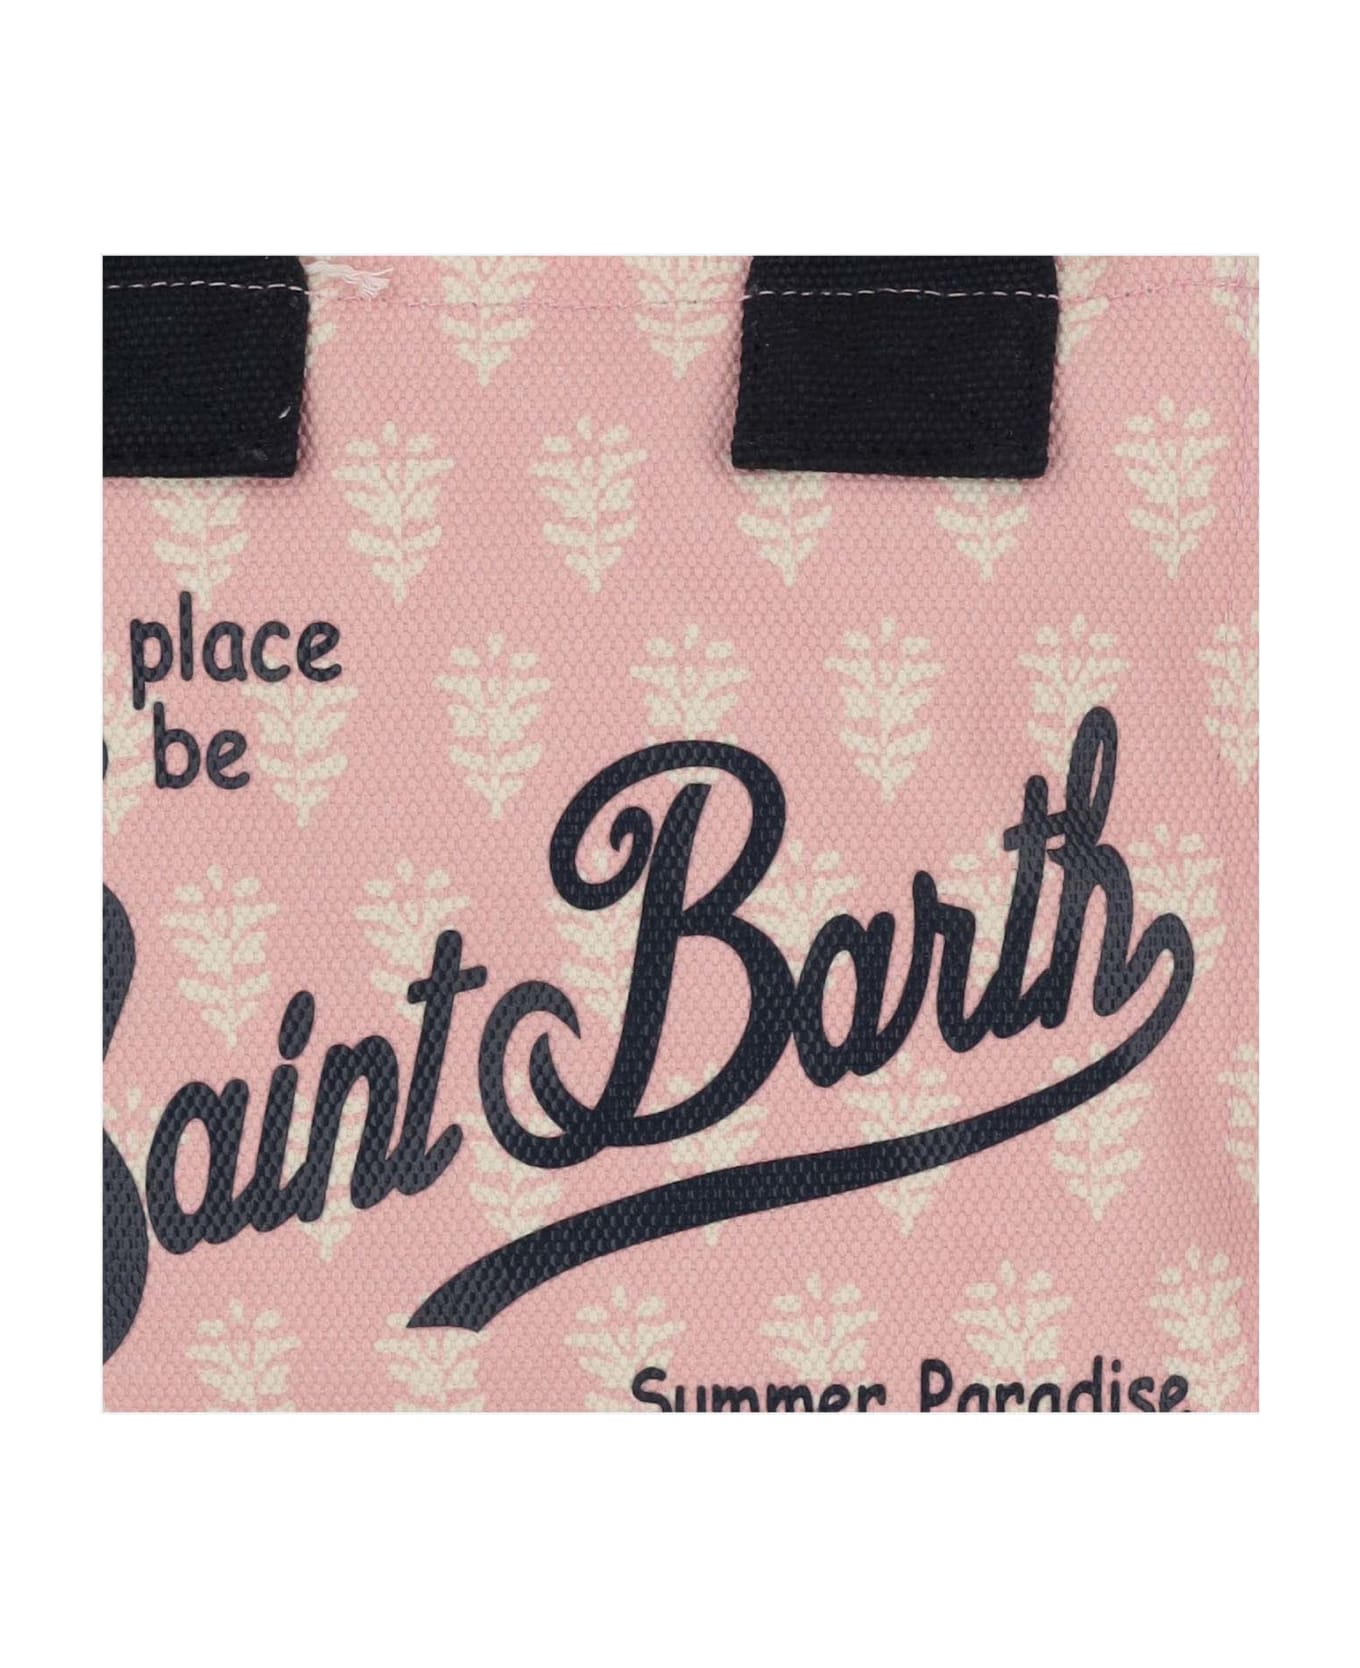 MC2 Saint Barth Colette Tote Bag With Logo - Red